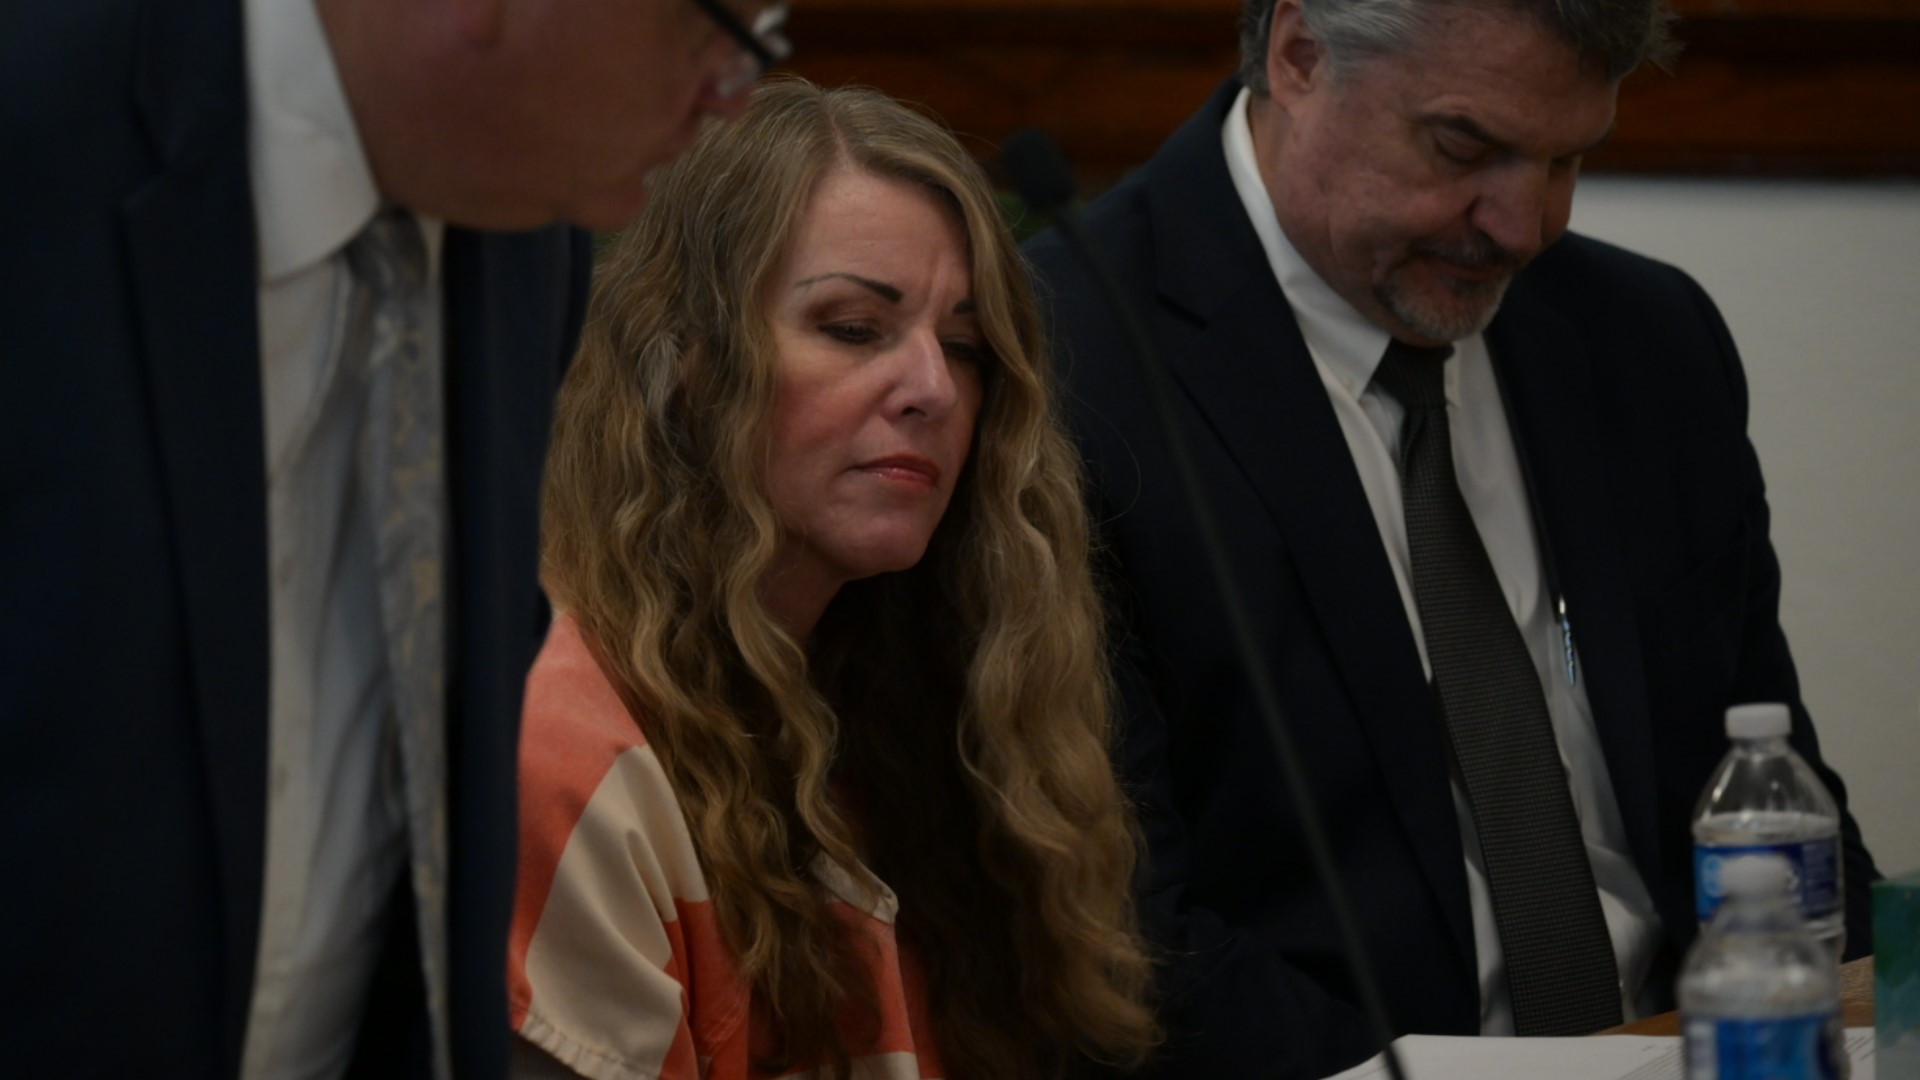 Vallow remained calm in her white and orange striped jumpsuit when she heard she will be spending the rest of her life in prison.